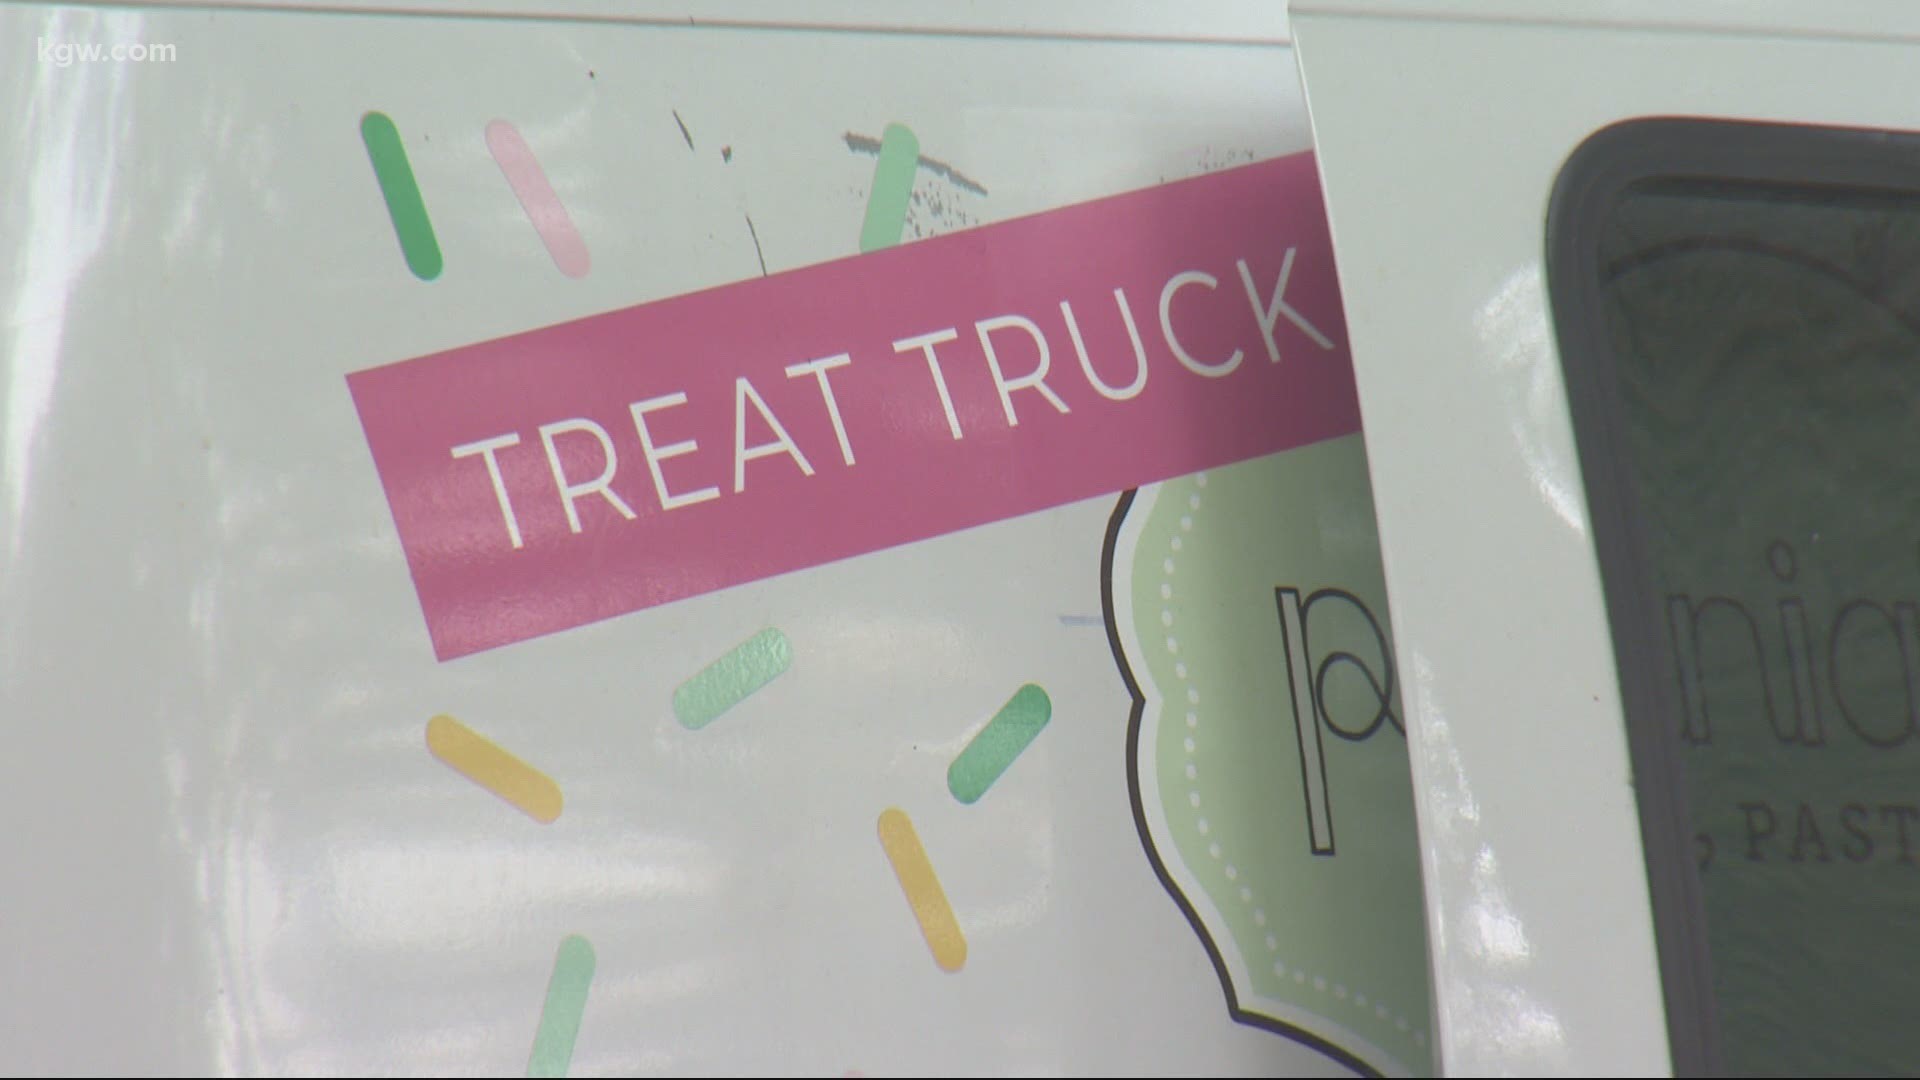 The owners of Petunia's Pies and Pastries decided to offer their vegan and gluten-free treats from their new "Treat Truck."